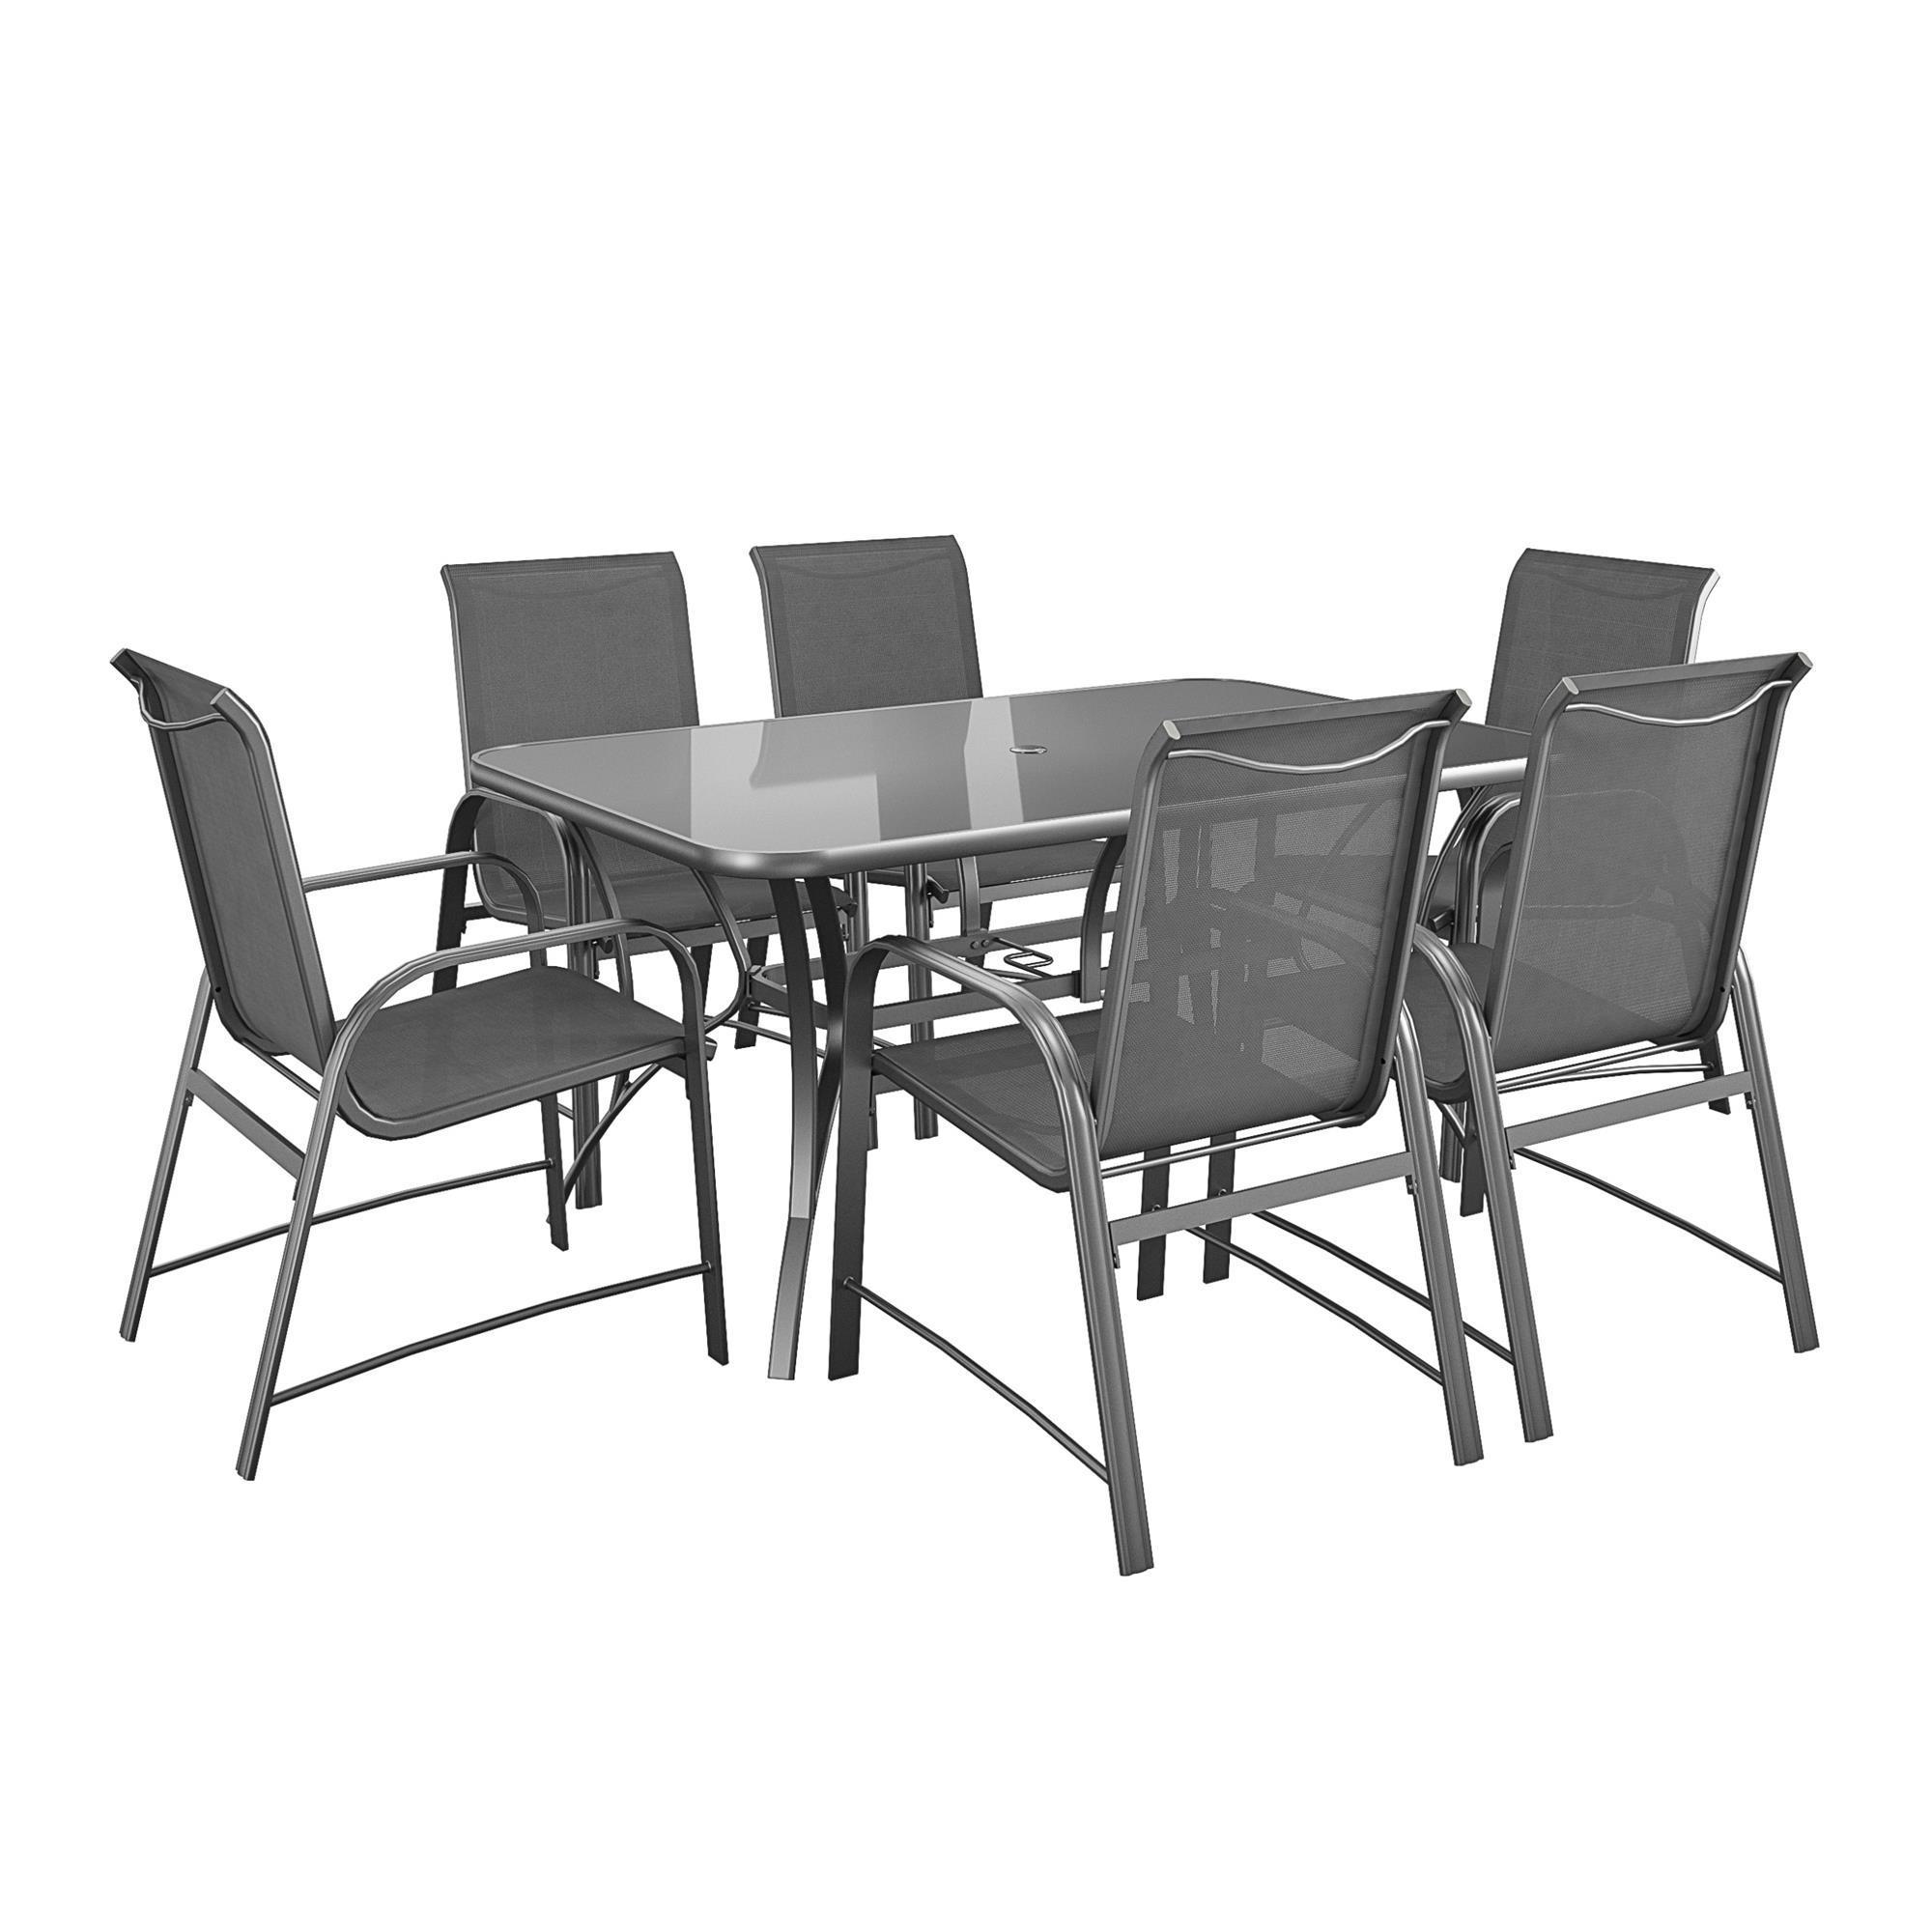 7 Piece Paloma Steel Patio Dining Set, Charcoal, Pieces (qty.) 7, Primary Color Gray, Seating Capacity 6, Model - Cosco 88647CHCE